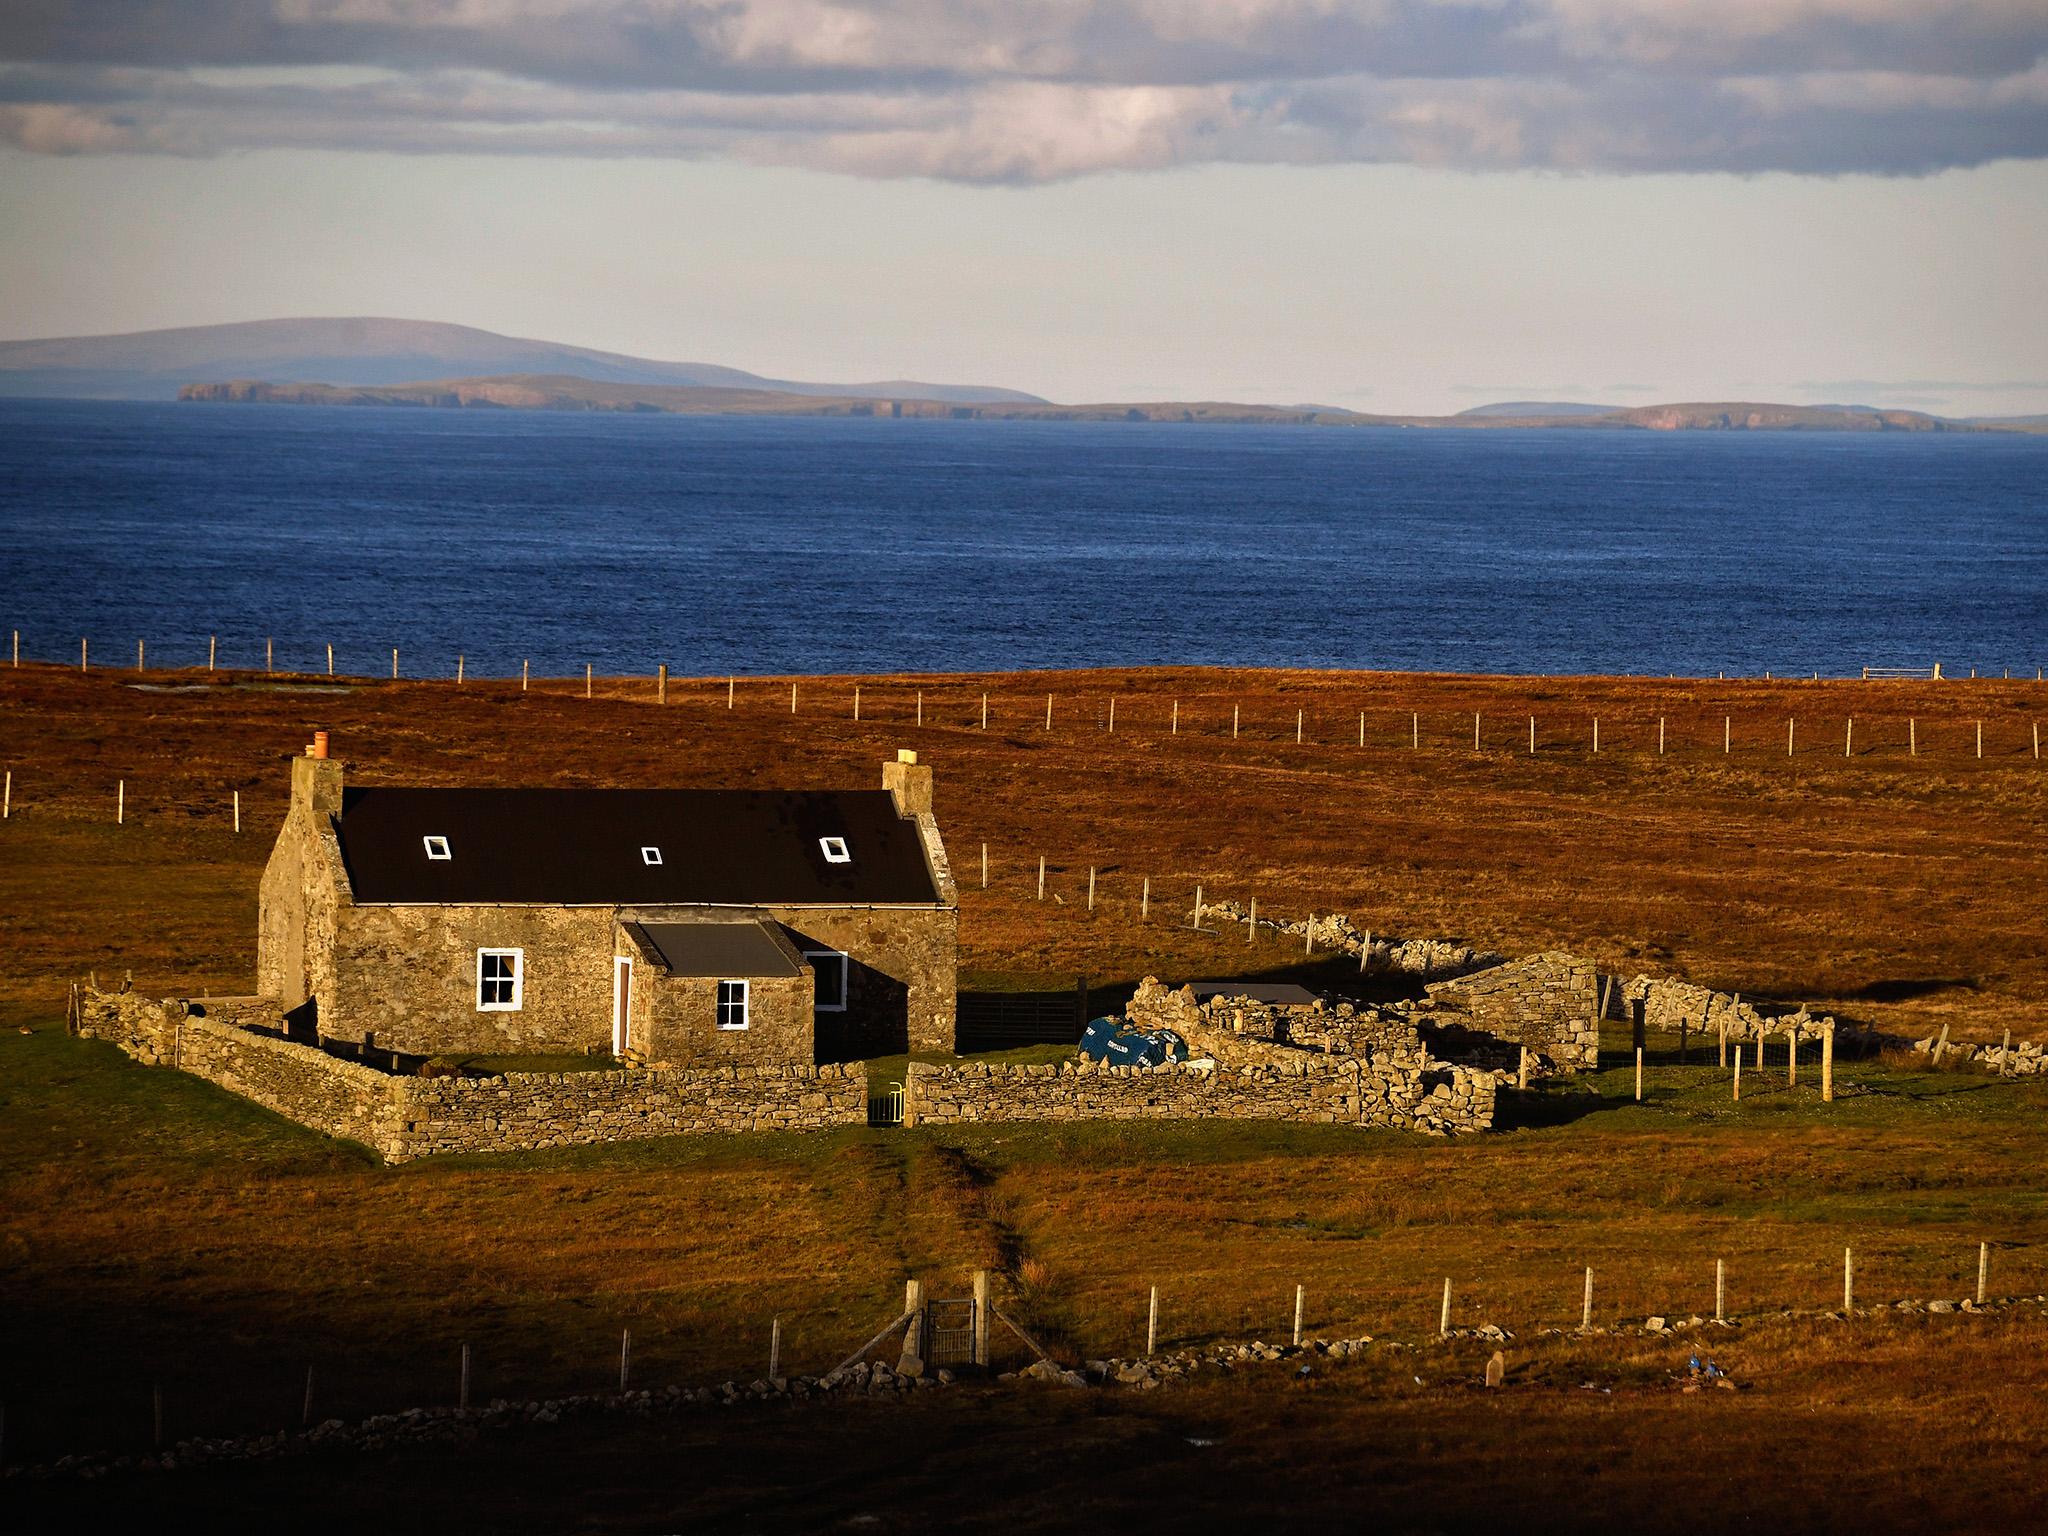 Foula has continued to honour the Julian calendar, invented by the Romans, since the rest of the UK gave it up